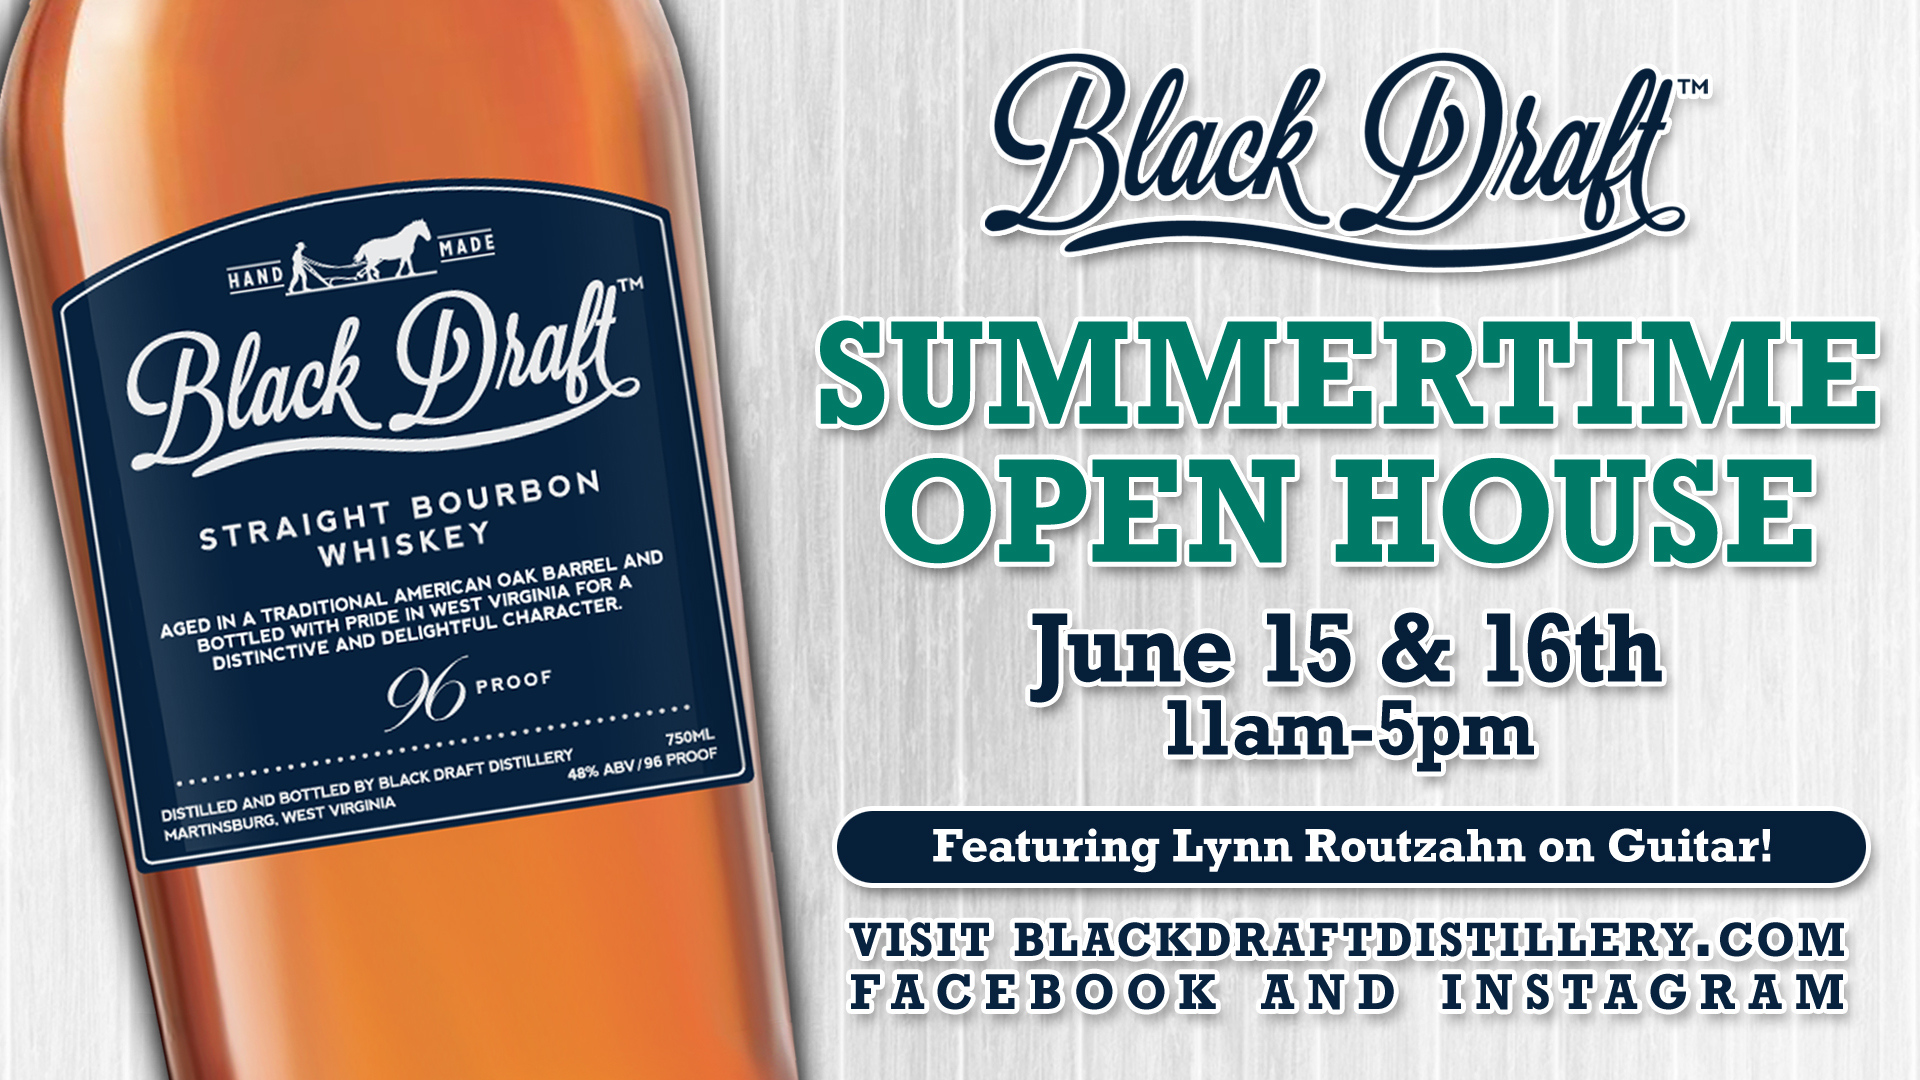 Black Draft Distillery Summertime Open House, June 15 and 16 from 11am - 5pm.  Featuring Lynn Routzahn on guitar!